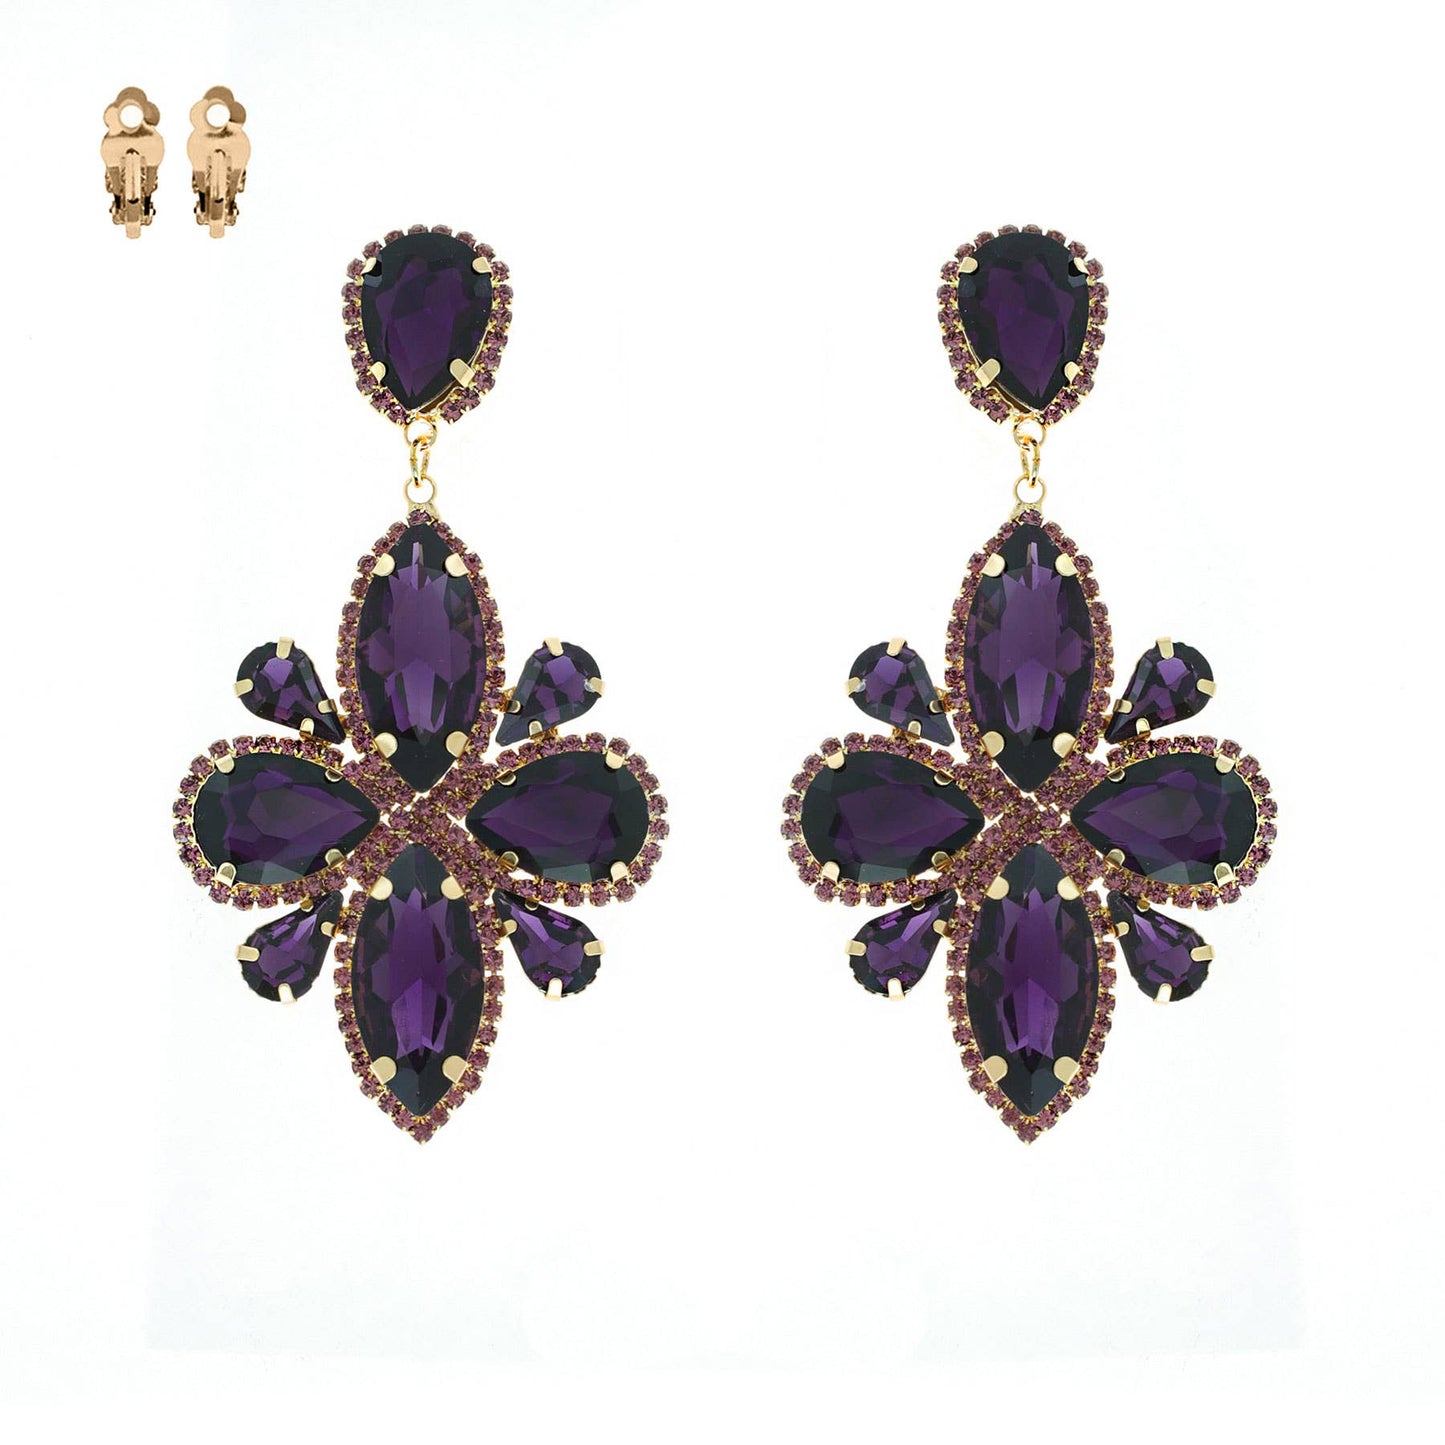 Statement Large Crystal Flower Clip On Earrings: Gold Multi Iridescent